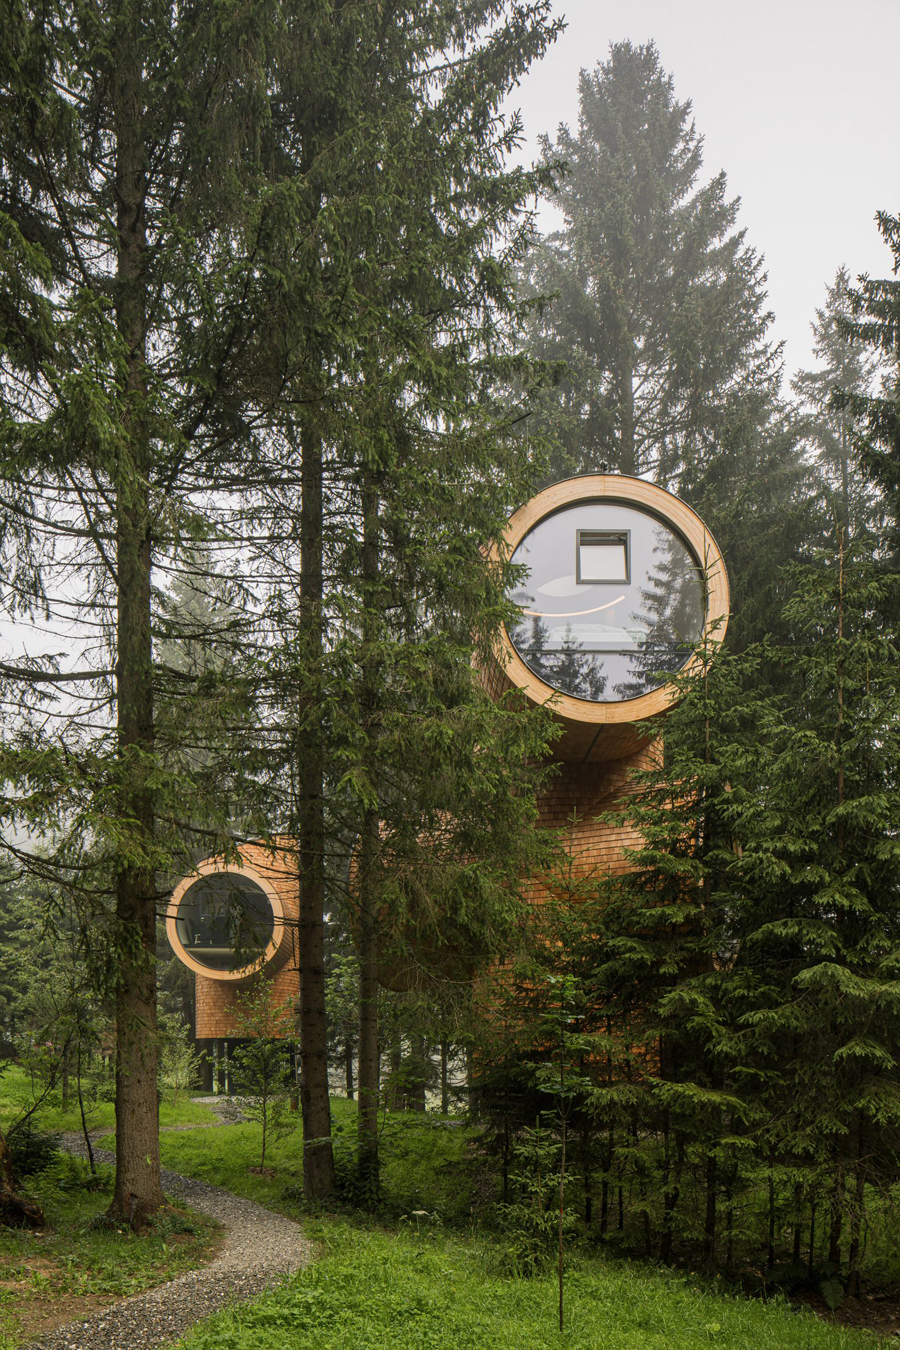 Fairytale Inspired Bert Treehouses by Precht and BaumBau